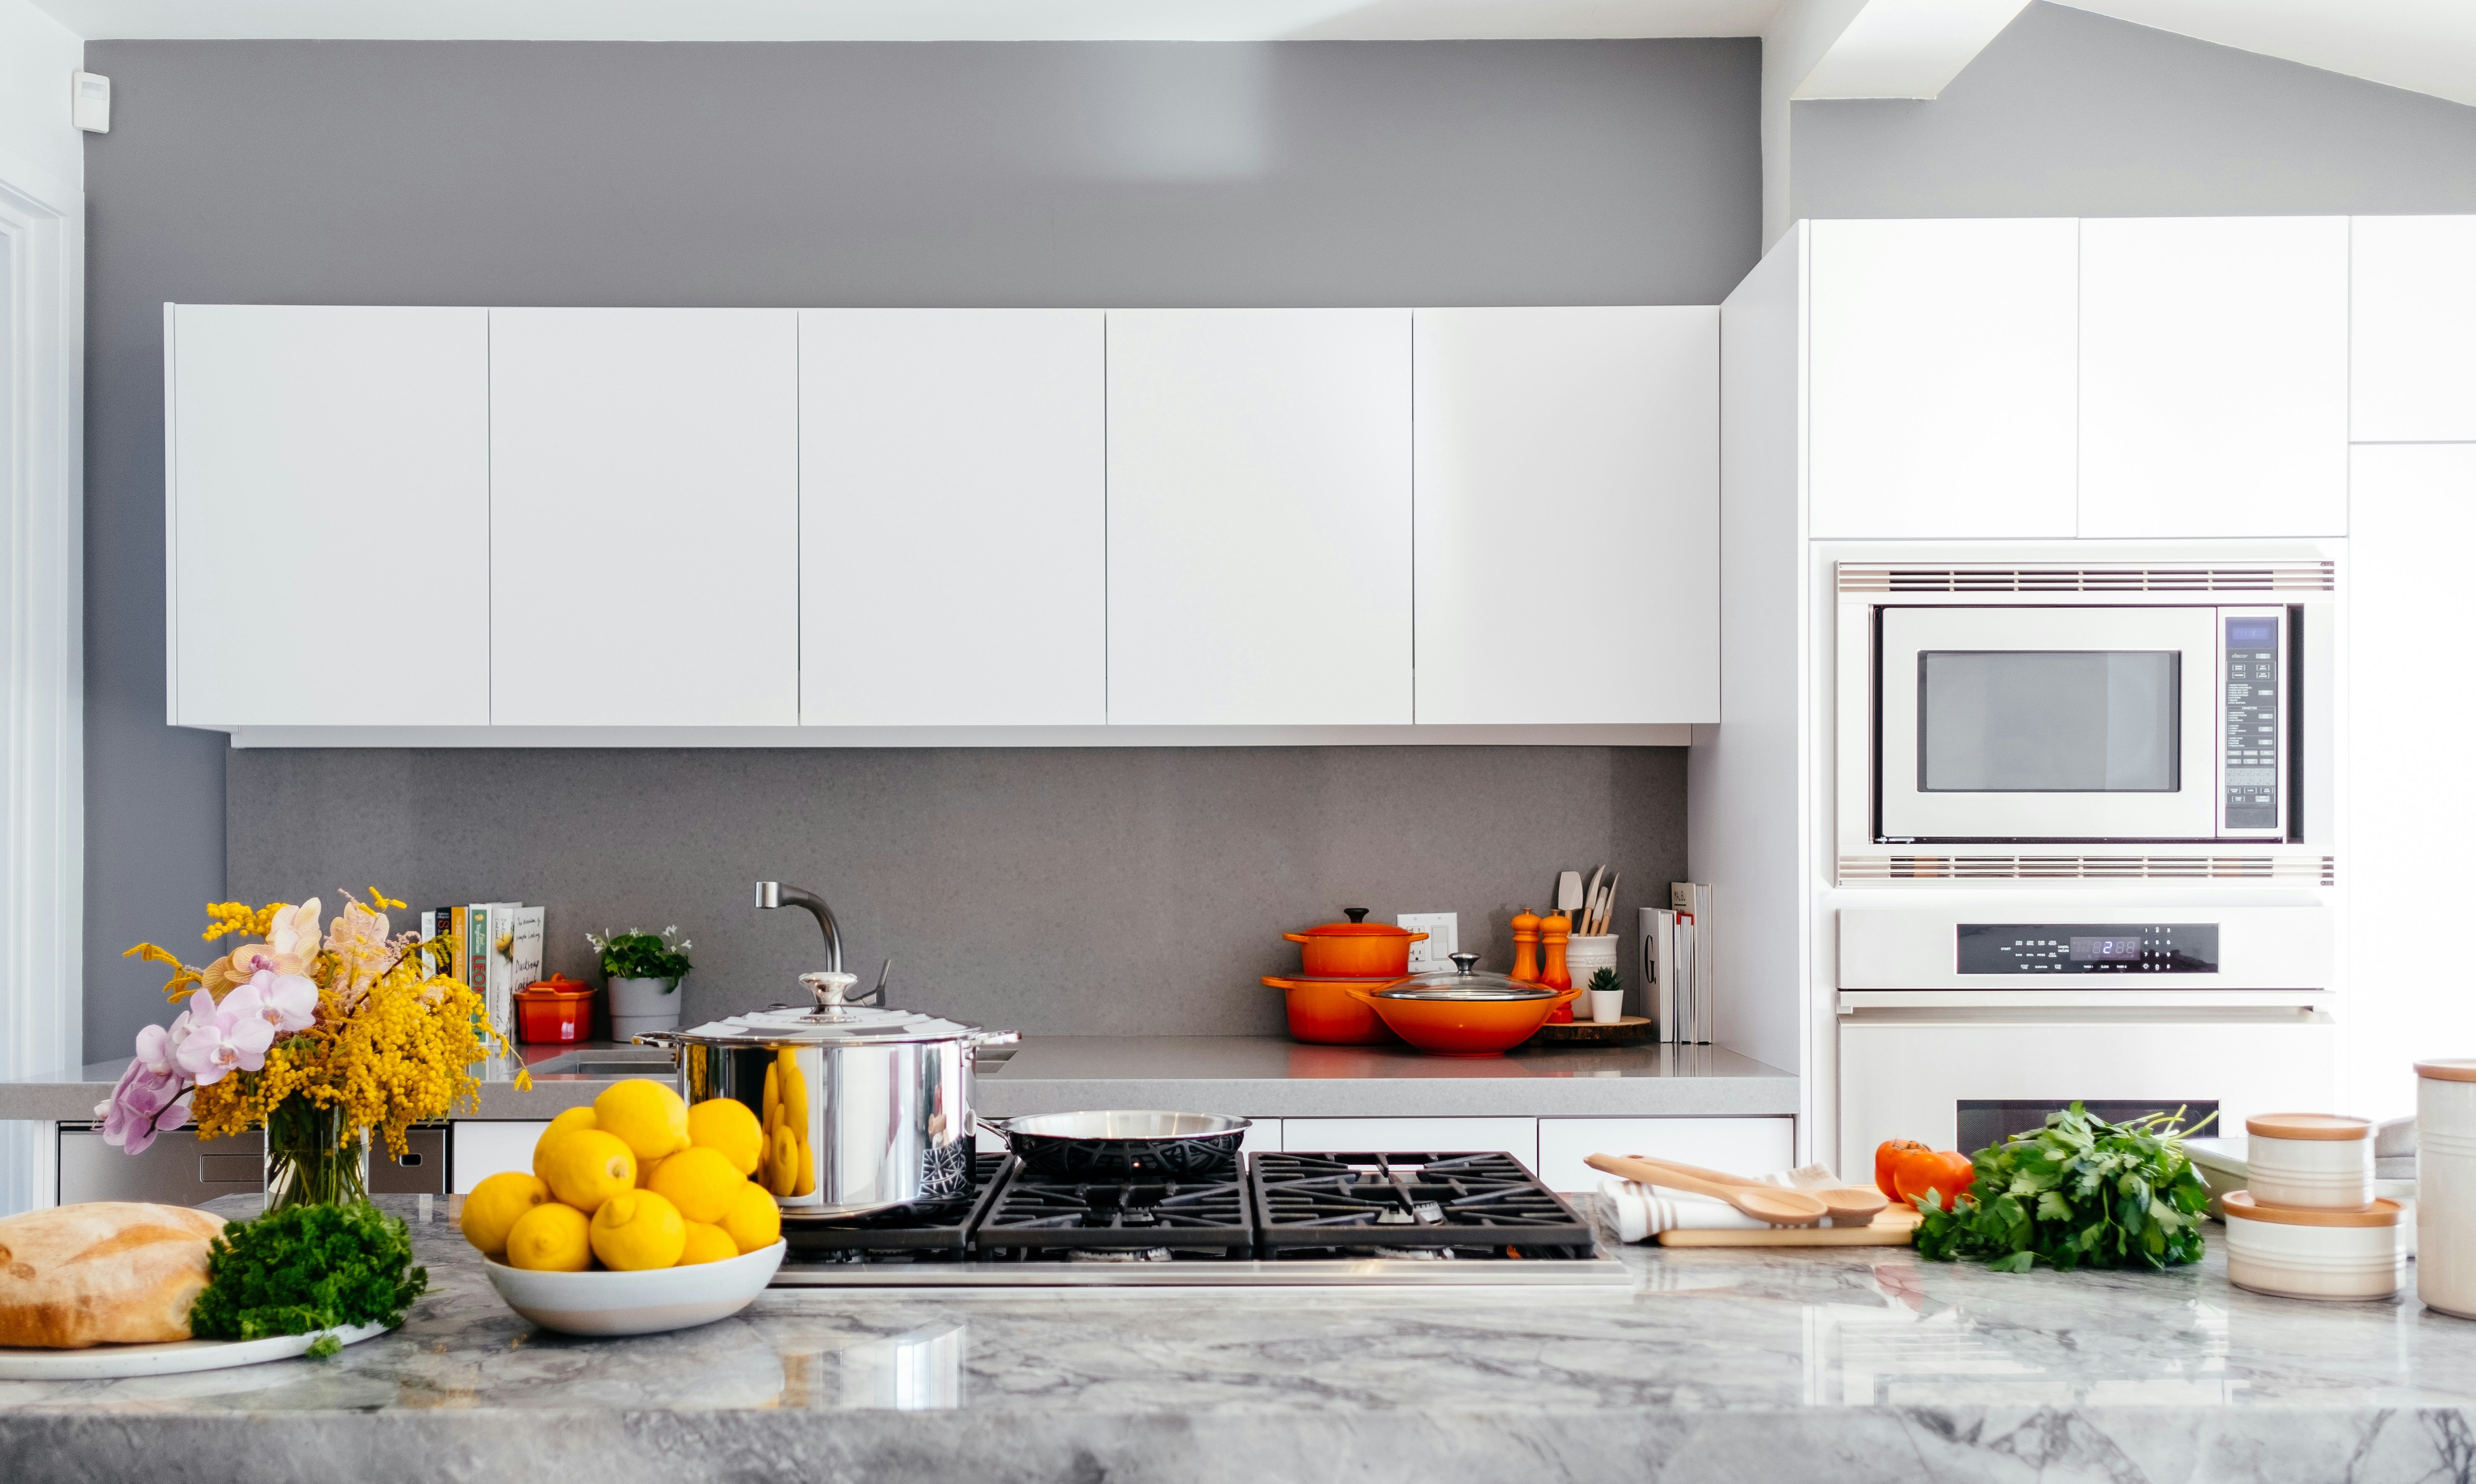 Kitchen cleaning habits for sustainable living